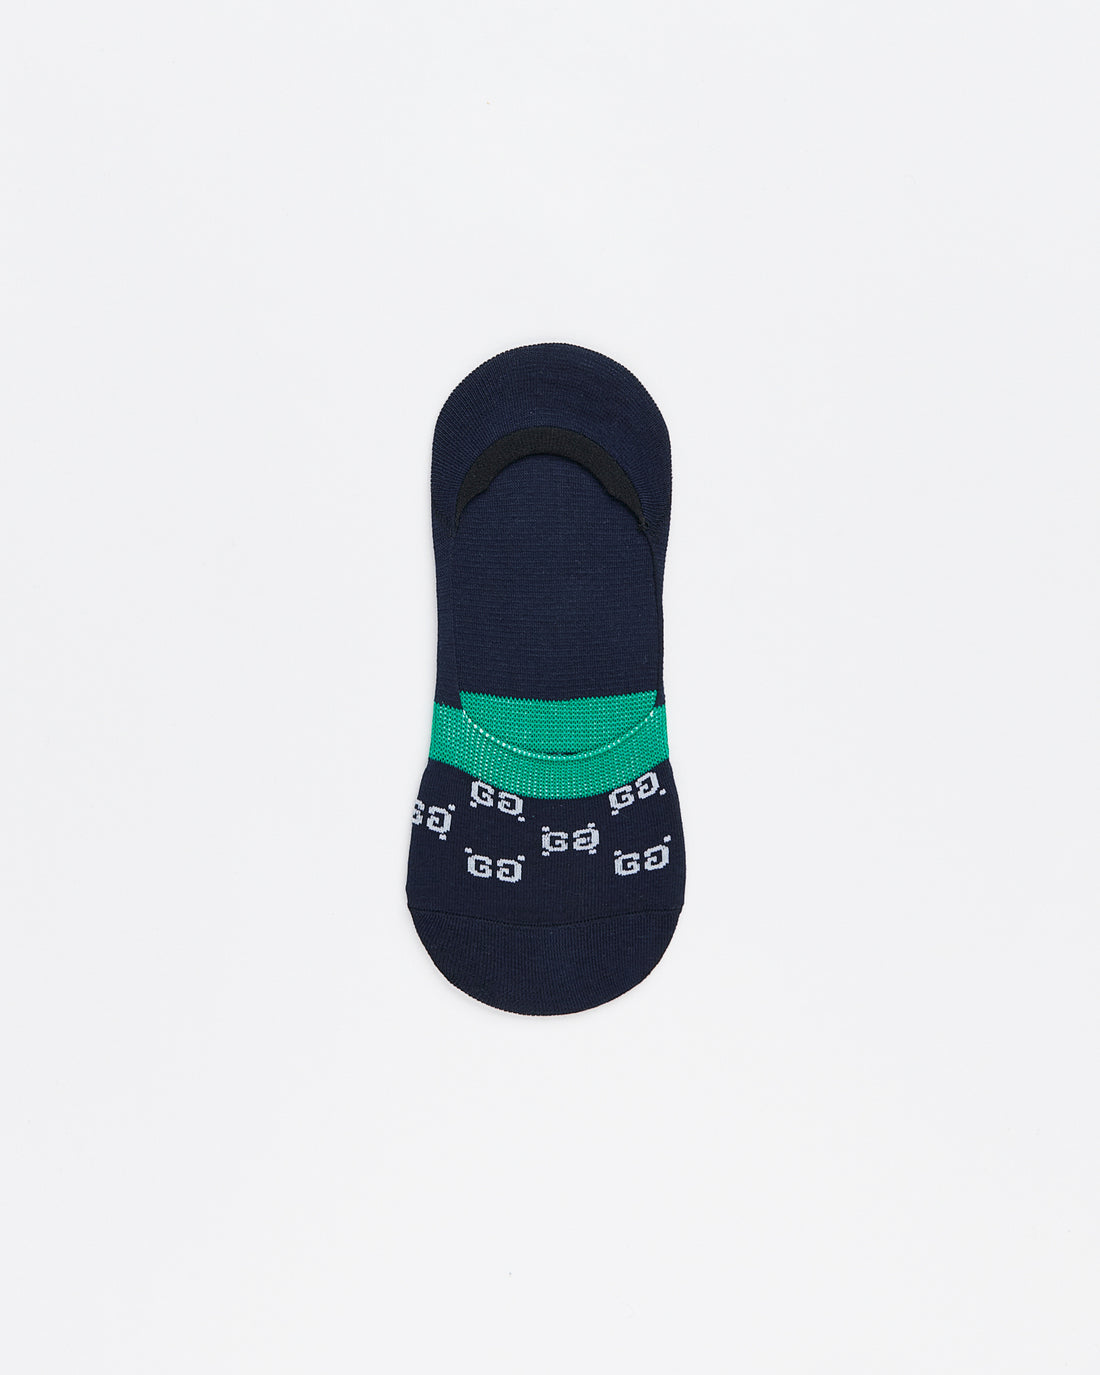 GUC Logo Embroidered 5 Pairs No Show Socks 15.90